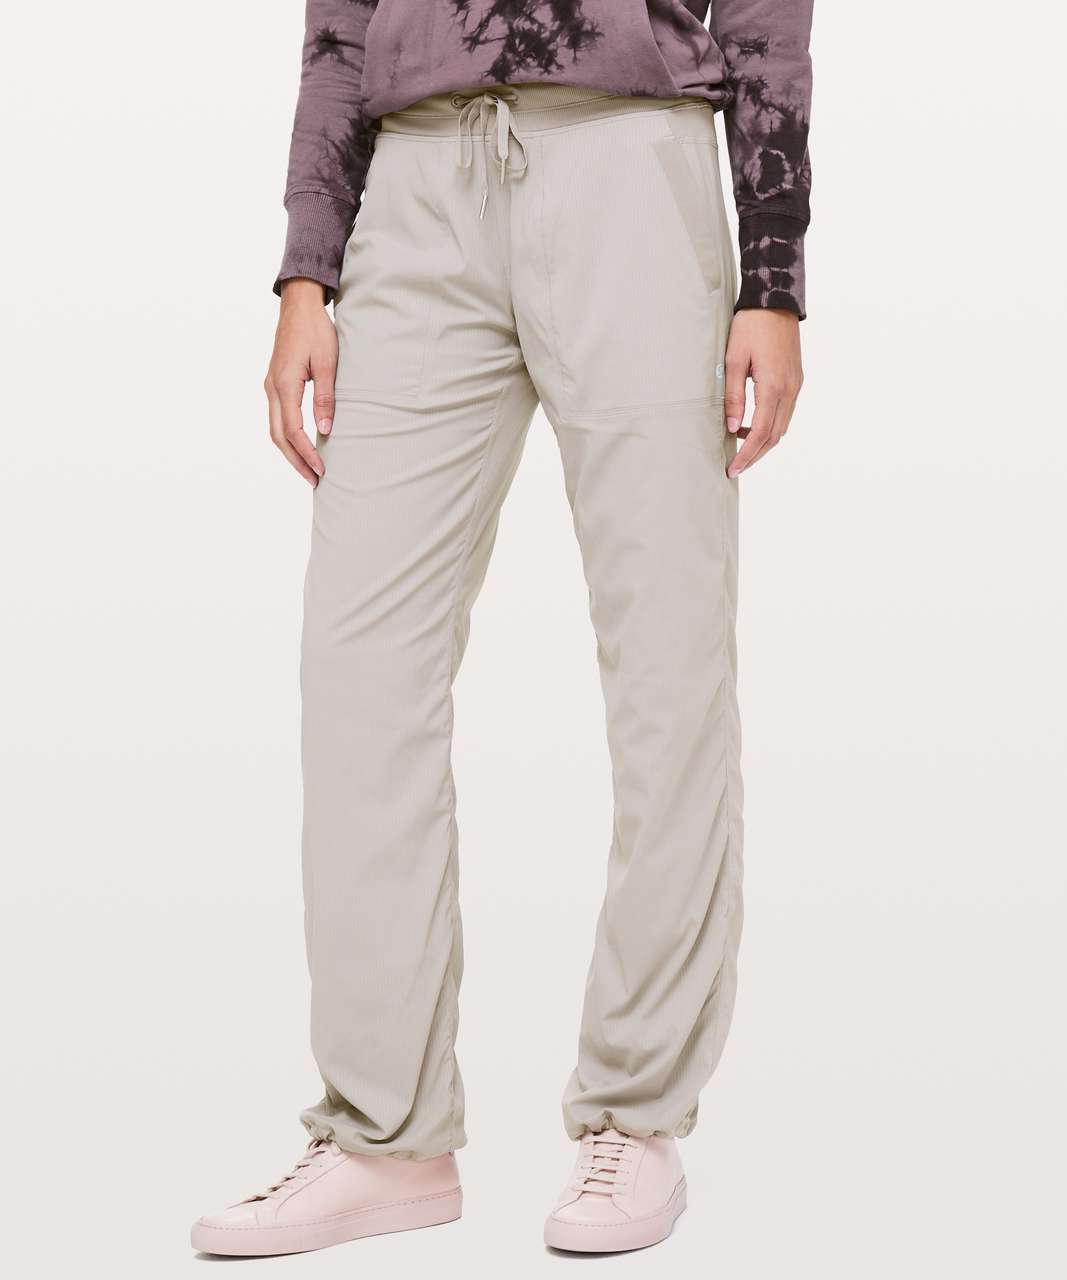 Studio Pant III (Regular) Lined 32 - These lightweight pants are